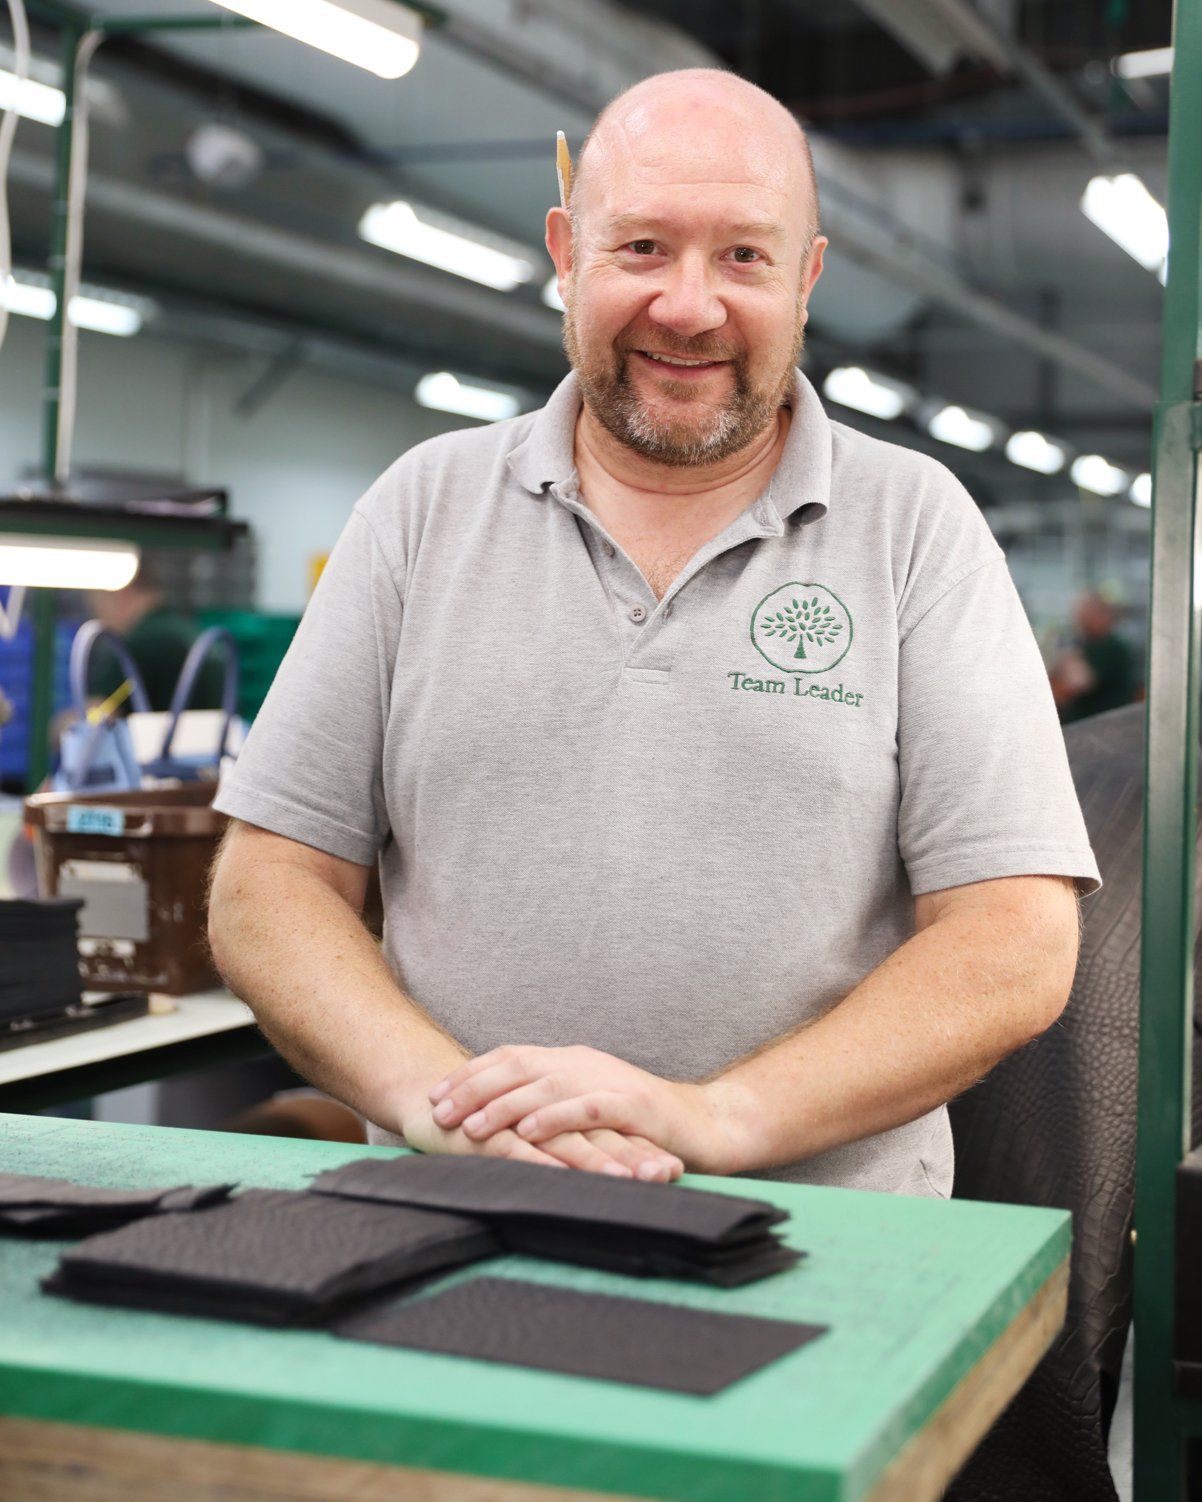 Mulberry employee at the cutting station in the factory